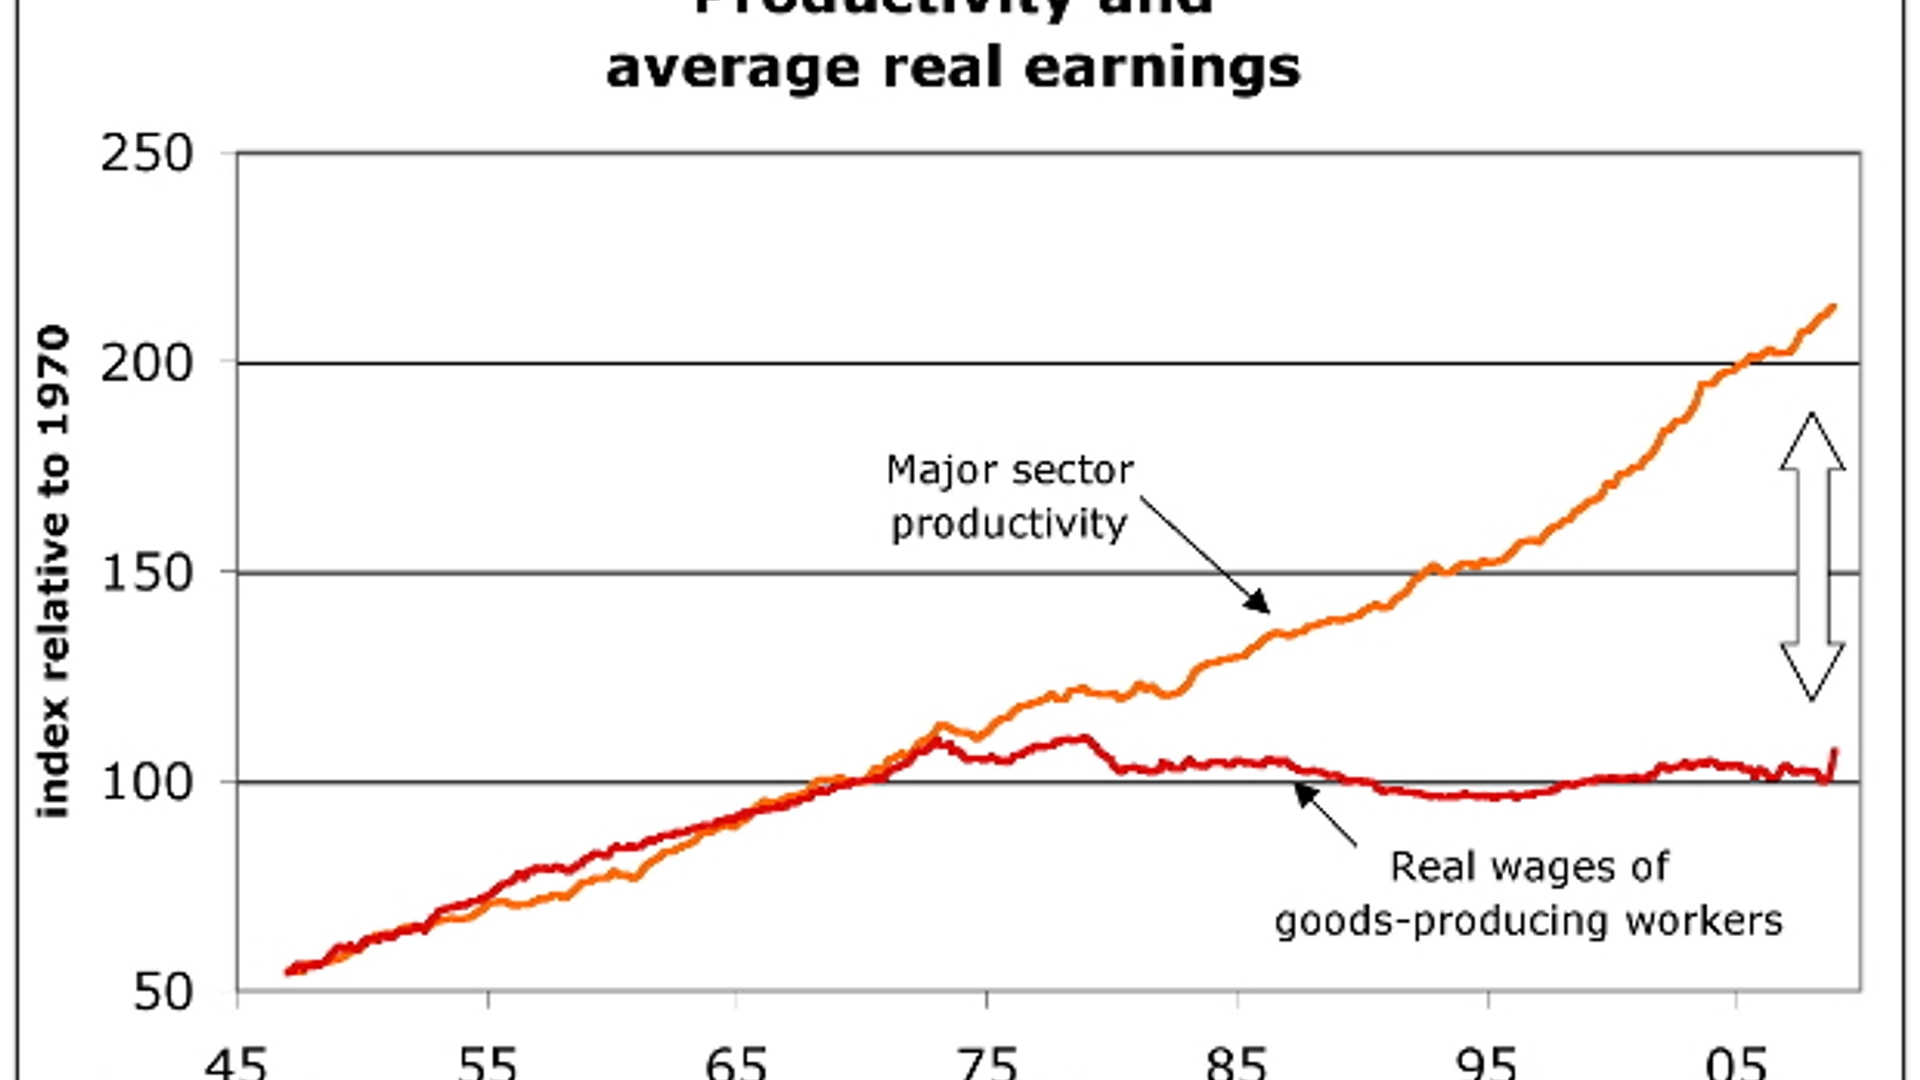 productivity-and-real-wages_620